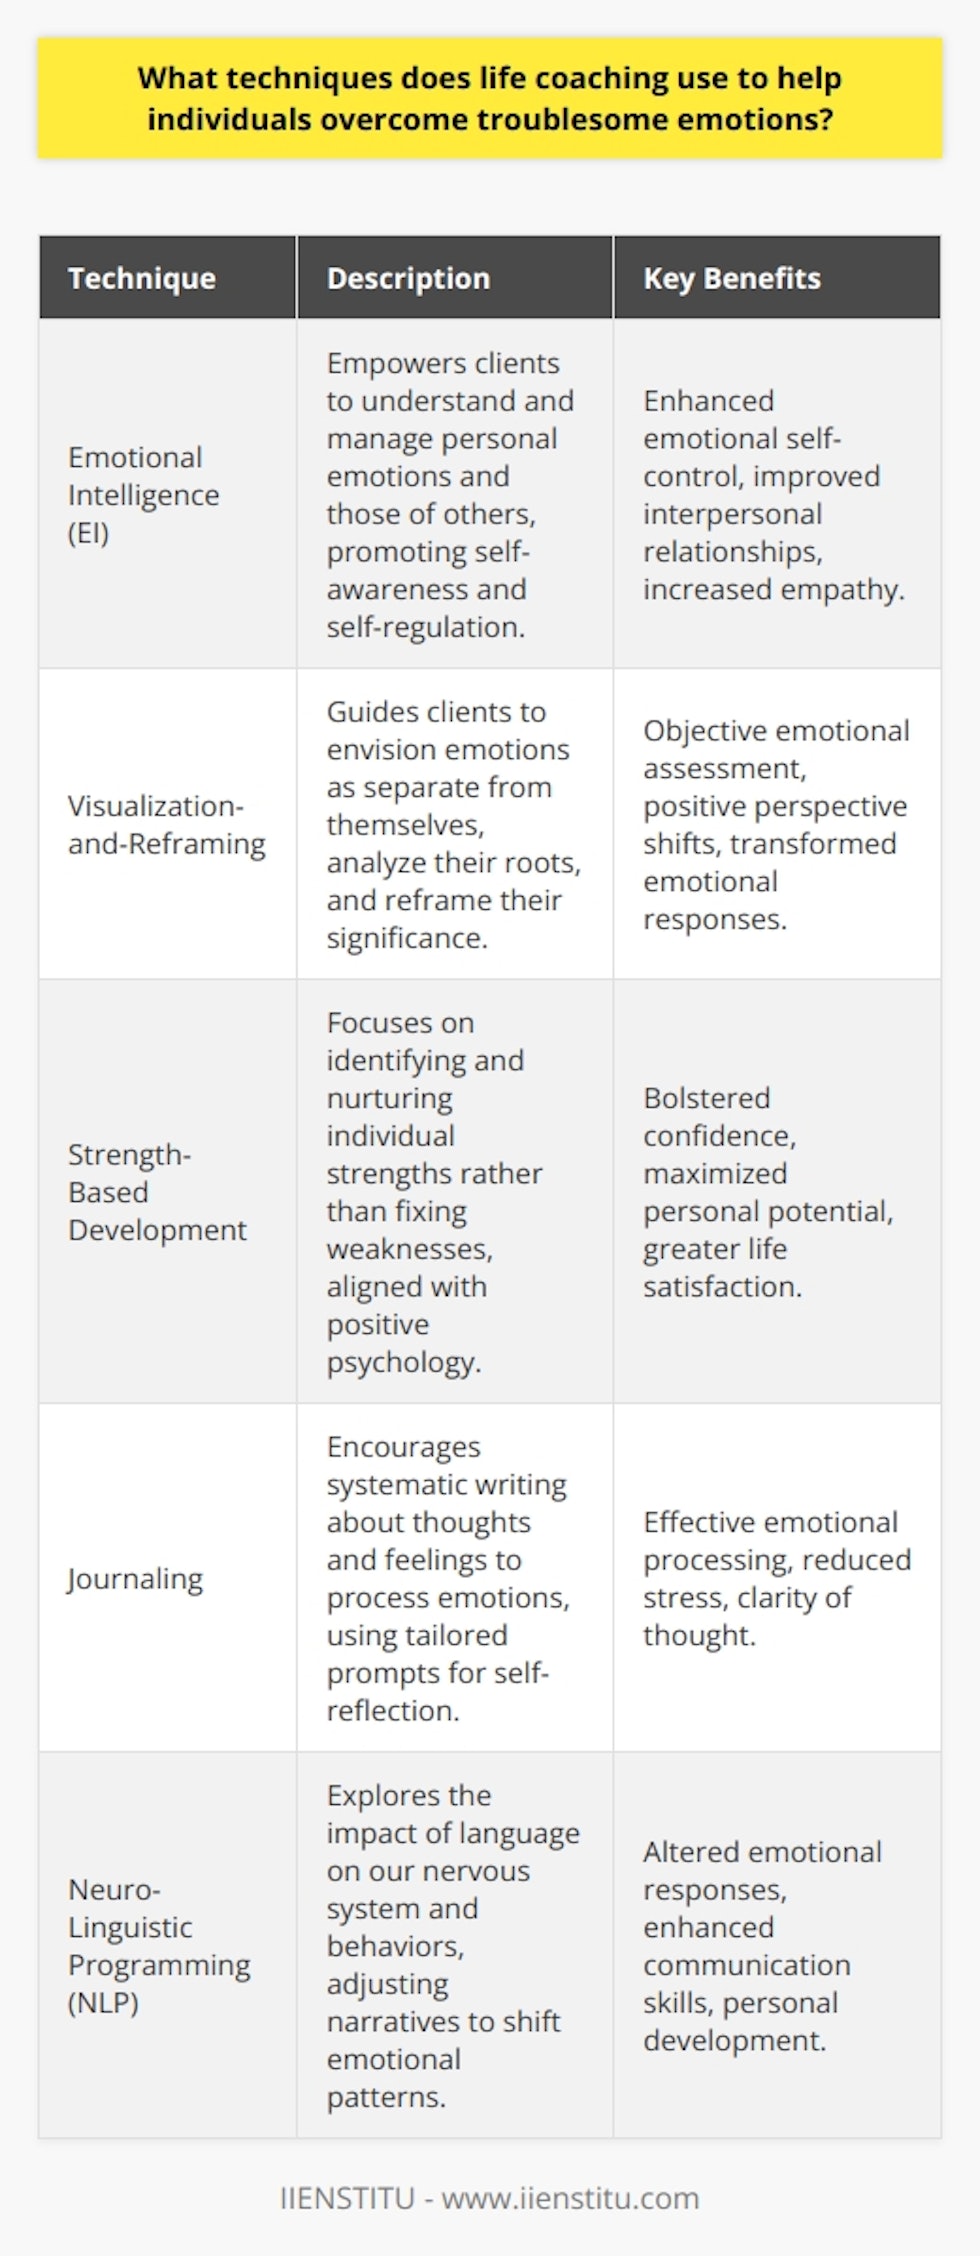 Life coaching embodies a synergistic partnership between the coach and the client, aiming to tap into one's full potential. One of the tools it leverages is practical techniques to guide individuals through the quagmire of troublesome emotions. These techniques are not only intrinsic to the coaching process but are somewhat distinct, crafted away from more traditional therapeutic interventions.At its core, life coaching employs a powerful facet of emotional navigation known as Emotional Intelligence (EI). EI is foundational in helping clients understand and manage their own emotions as well as the emotions of others. Coaches using EI encourage clients to cultivate self-awareness, enabling them to recognize their emotional states and the triggers that set them off. This self-awareness goes hand in hand with self-regulation, giving individuals the ability to control or adjust their emotions to suit the situation.One of the rare techniques offered by life coaches is a visualization-and-reframing process that is seldom discussed in typical self-help texts. In this process, clients are guided to envision their troublesome emotions as separate entities. By doing so, they can objectively analyze these emotions, understand their origin, and ultimately reframe the narrative around them. The reframe pivots the individual's perspective, turning what might be seen as a negative emotion into a signal or catalyst for change.A key tool used extensively in life coaching is Strength-Based Development. Unlike traditional approaches that may focus on analysing and fixing weaknesses, this technique concentrates on identifying and honing the strengths and virtues of an individual. This positive psychology facet encourages individuals to operate from a place of personal strength, which leads to an increased sense of well-being and more effective emotion management.Journaling is another method cherished in the life coaching realm, though its efficacy might be undervalued in the broader landscape of mental health practices. Coaches encourage clients to write down their thoughts and feelings, which serves as a cathartic exercise for processing emotions. What makes journaling transformative is the systemized approach it takes in life coaching — journal prompts are often tailored to provoke deeper self-reflection and to challenge existing emotional patterns.Additionally, life coaches sometimes integrate NLP (Neuro-Linguistic Programming) techniques, which focus on understanding how the language we use influences our nervous system and patterns of behavior. By adjusting this language and narrative, individuals can alter their emotional responses and perceptions, a technique which isn't conventionally highlighted in popular emotion-management strategies.It's essential to recognize that these techniques are adaptive, and life coaches, such as those from IIENSTITU, ensure that the process is collaborative, flexible, and personalized. The amalgamation of these distinctive methods facilitates a nuanced and effective approach to overcoming troublesome emotions.In essence, life coaching wields a confluence of innovative techniques designed to empower individuals. The strategic use of EI, visualization, reframing, strength-based development, journaling, and NLP, among others, provides a unique arsenal for individuals to not only face but also actively reshape their emotional landscape. These are just the tip of the iceberg in the diverse toolkit life coaches leverage to assist individuals in navigating the tumultuous seas of emotional challenges.